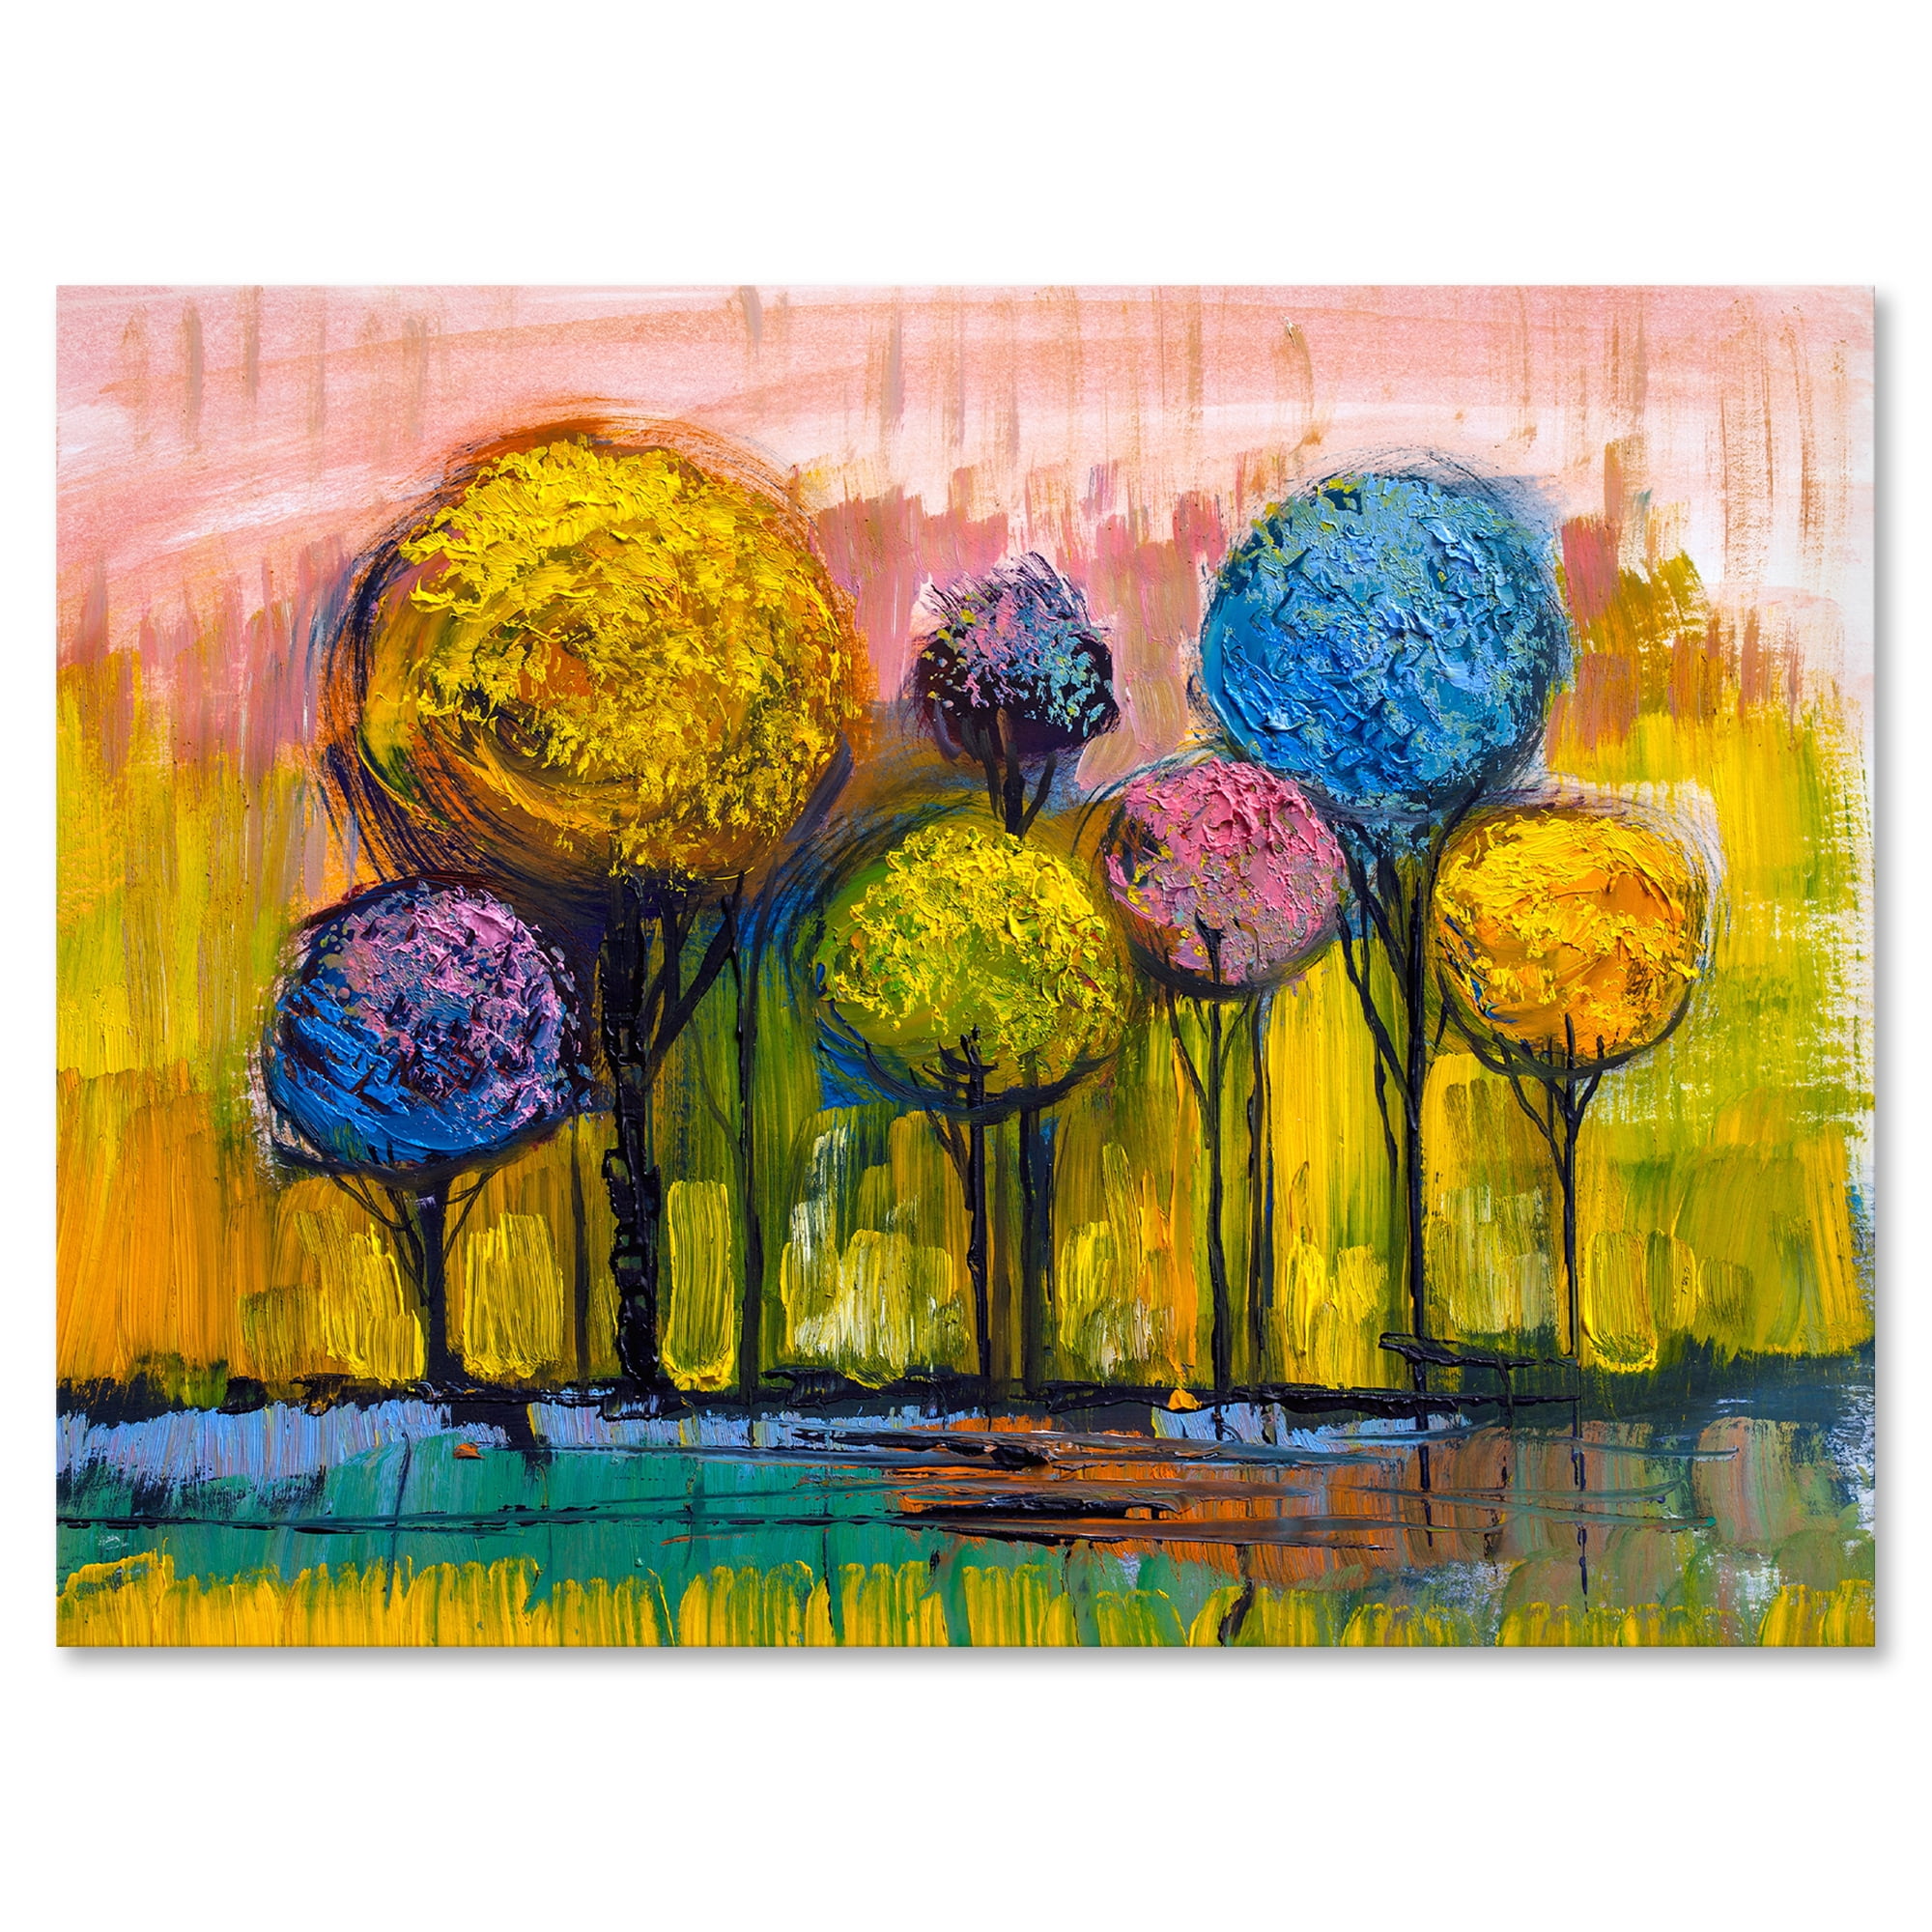 Colourful Landscape Trees Impressionist IV 12 in x 8 in Painting Canvas Art Print, by Designart